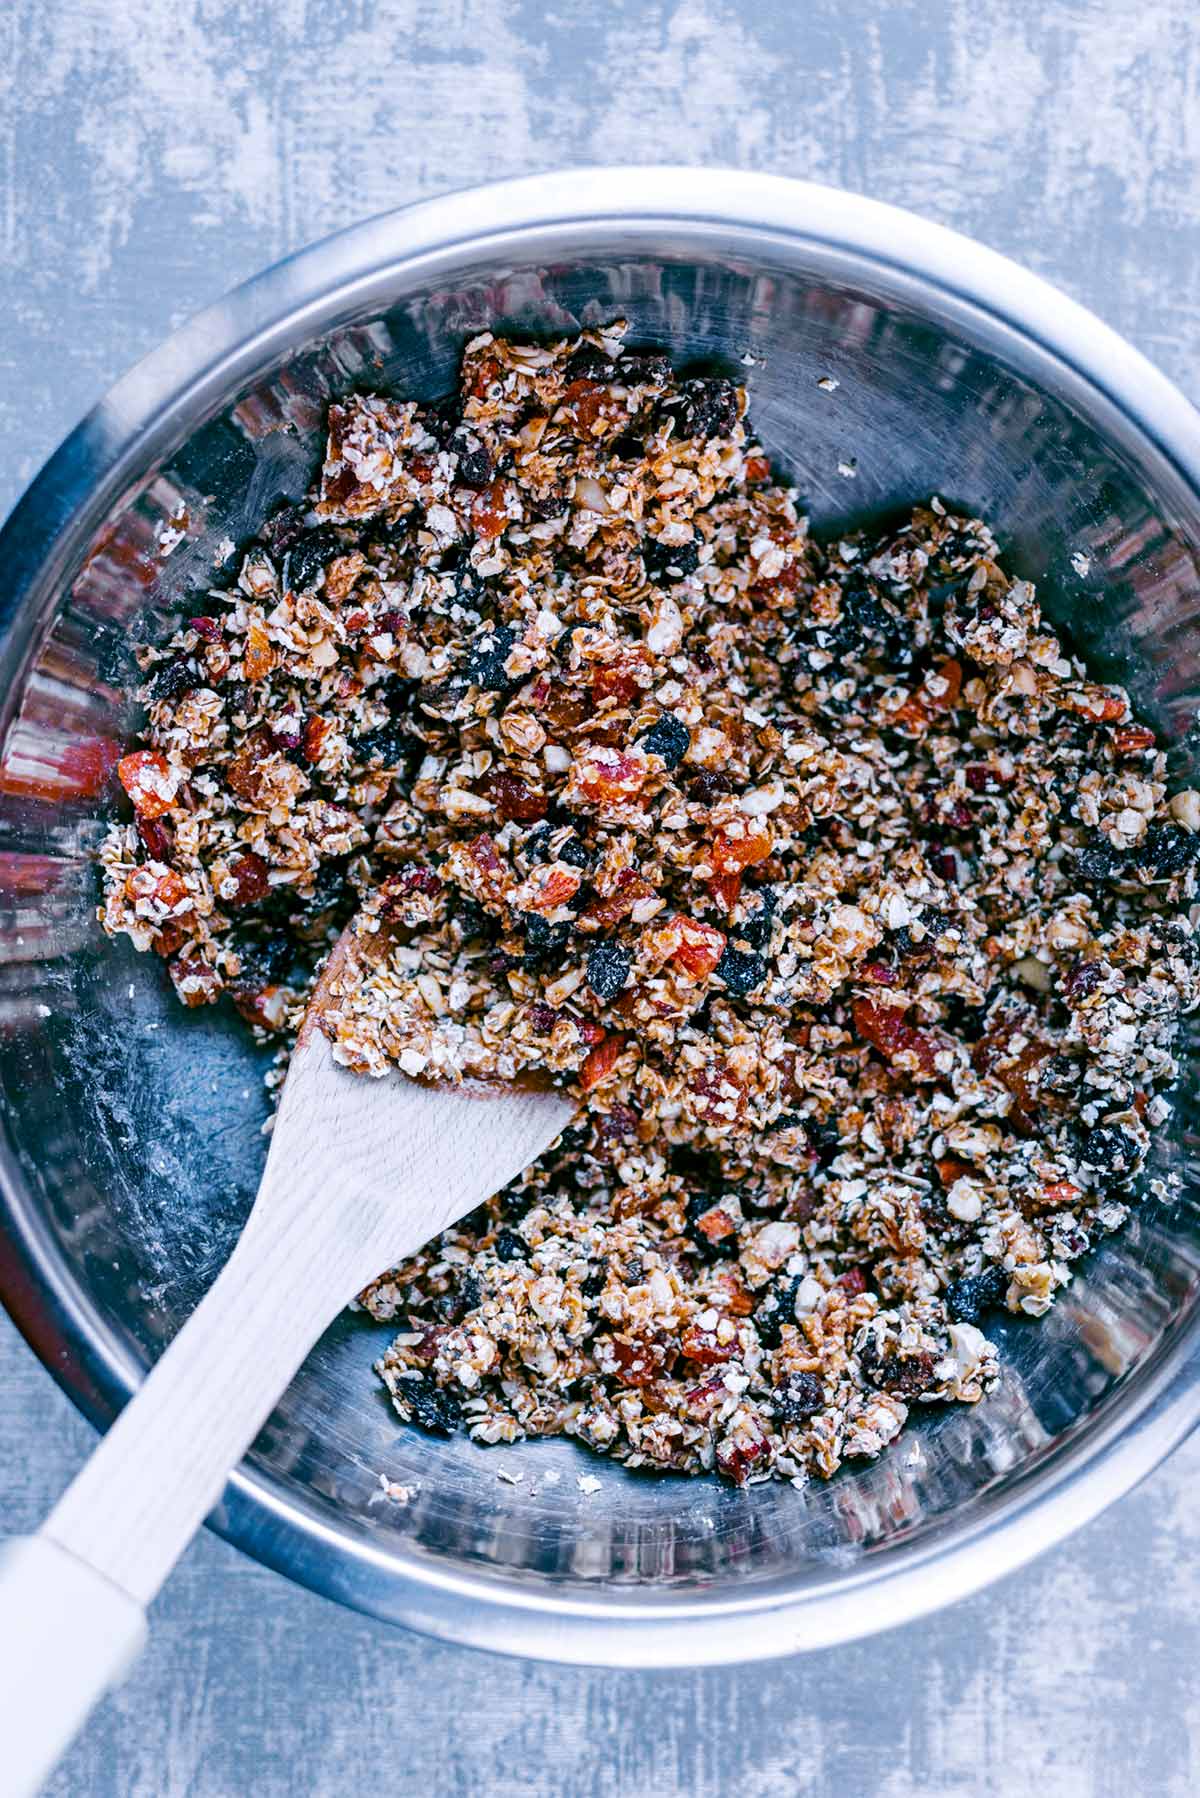 An oat, nut butter and dried fruit mixture in a bowl.